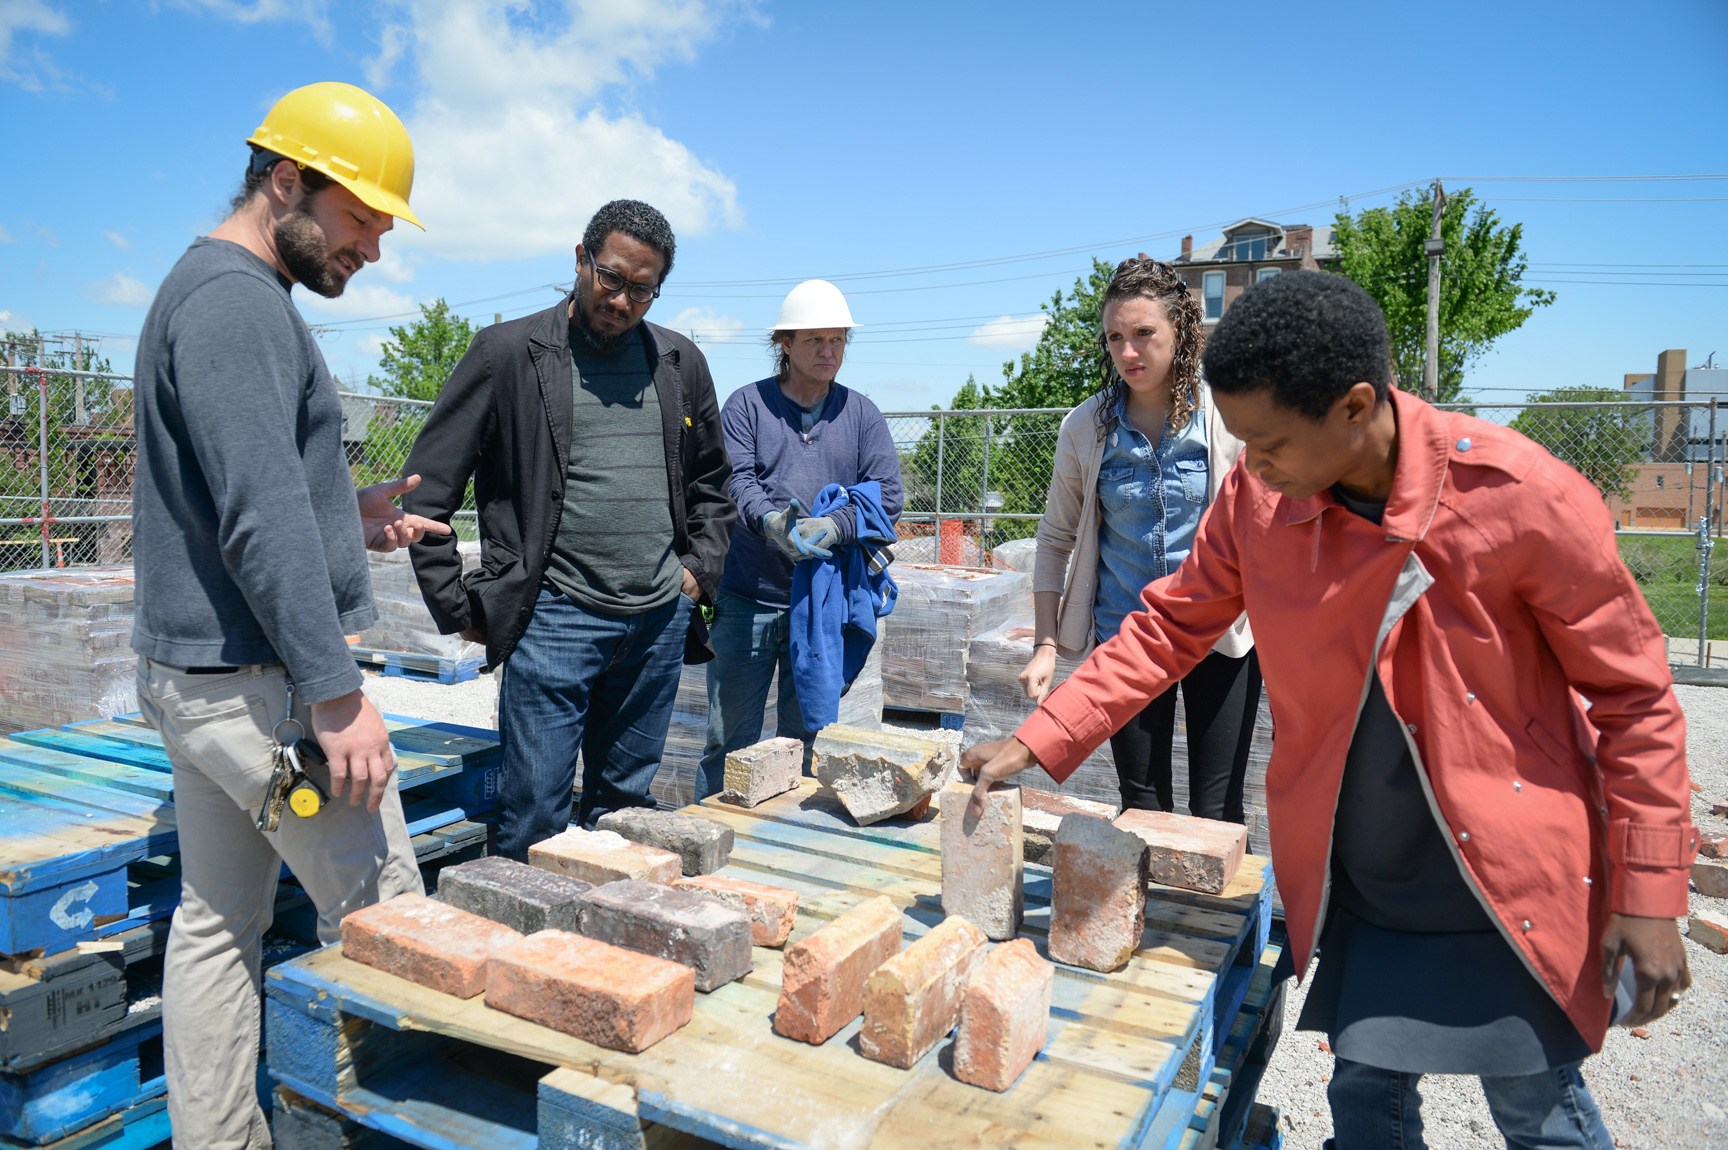 Amanda Williams, Andres L. Hernandez, and their team stand around a stack of pallets with a variety of bricks on it. Williams holds a brick upright on the pallet.